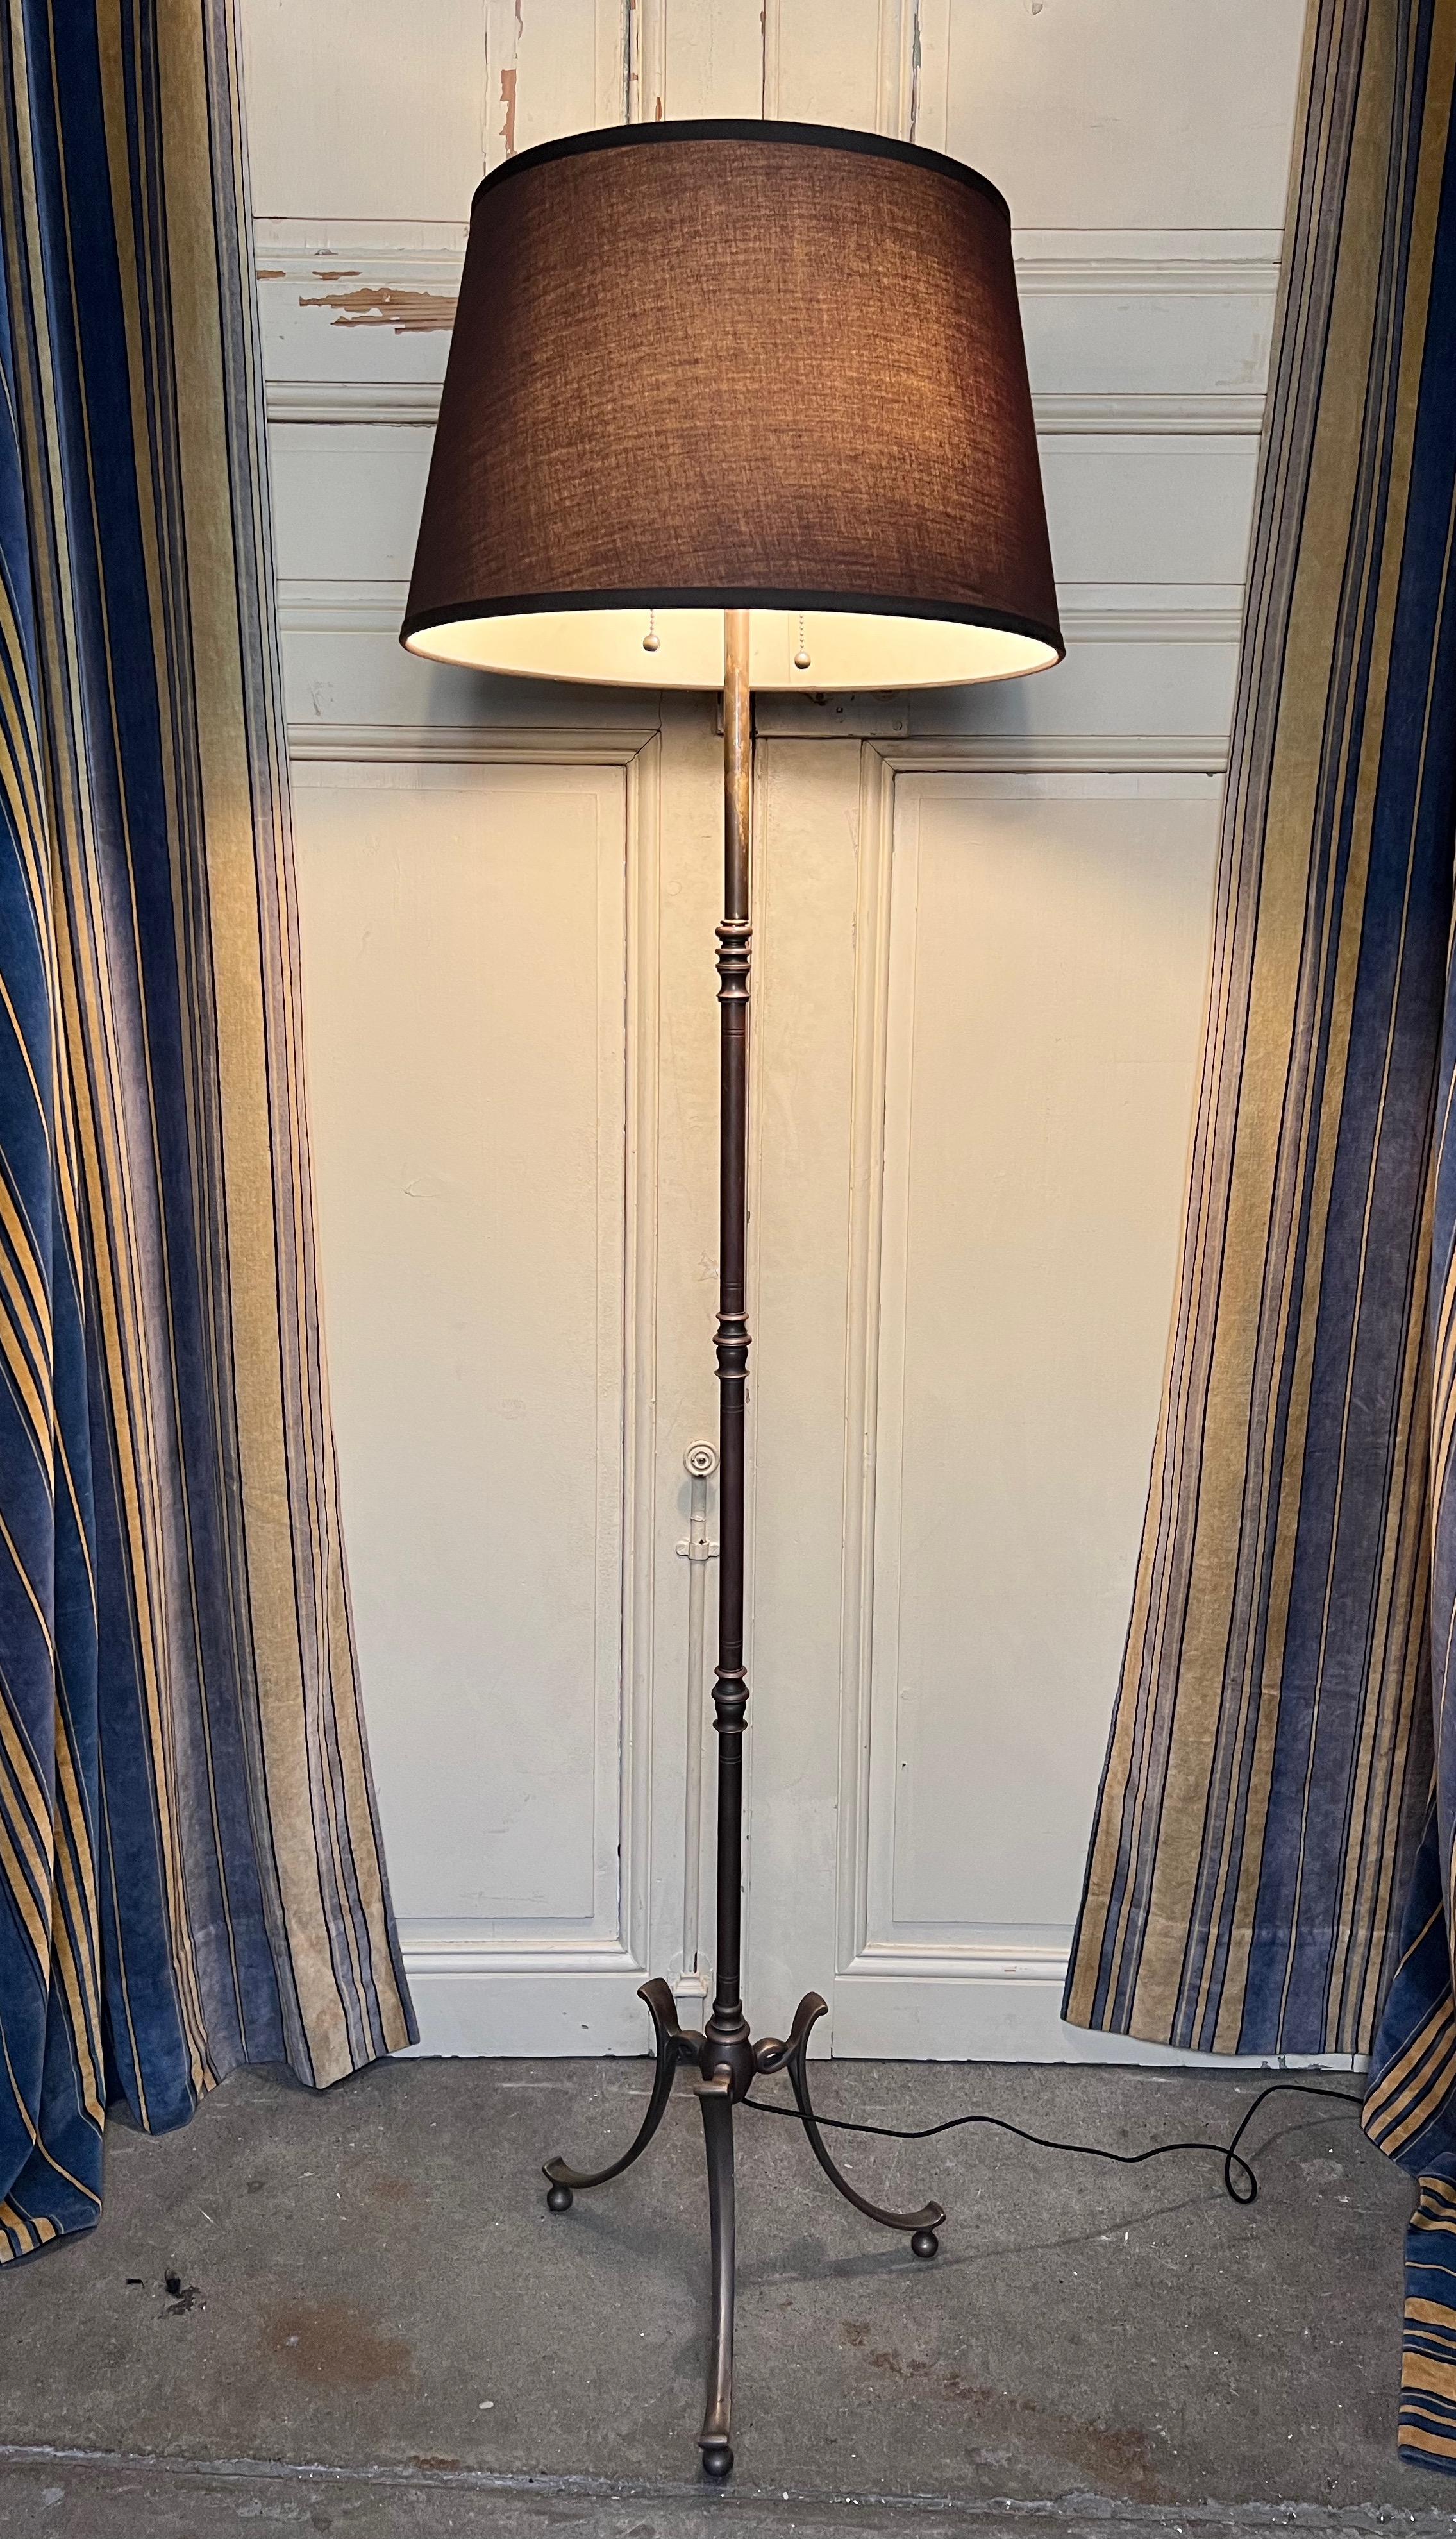 This elegant French floor lamp from the 1950s features a tripod base supported by balled feet, adding stability and style to its design. The stem of the lamp is beautifully finished in oil rubbed bronze, with turned accents that lend a traditional